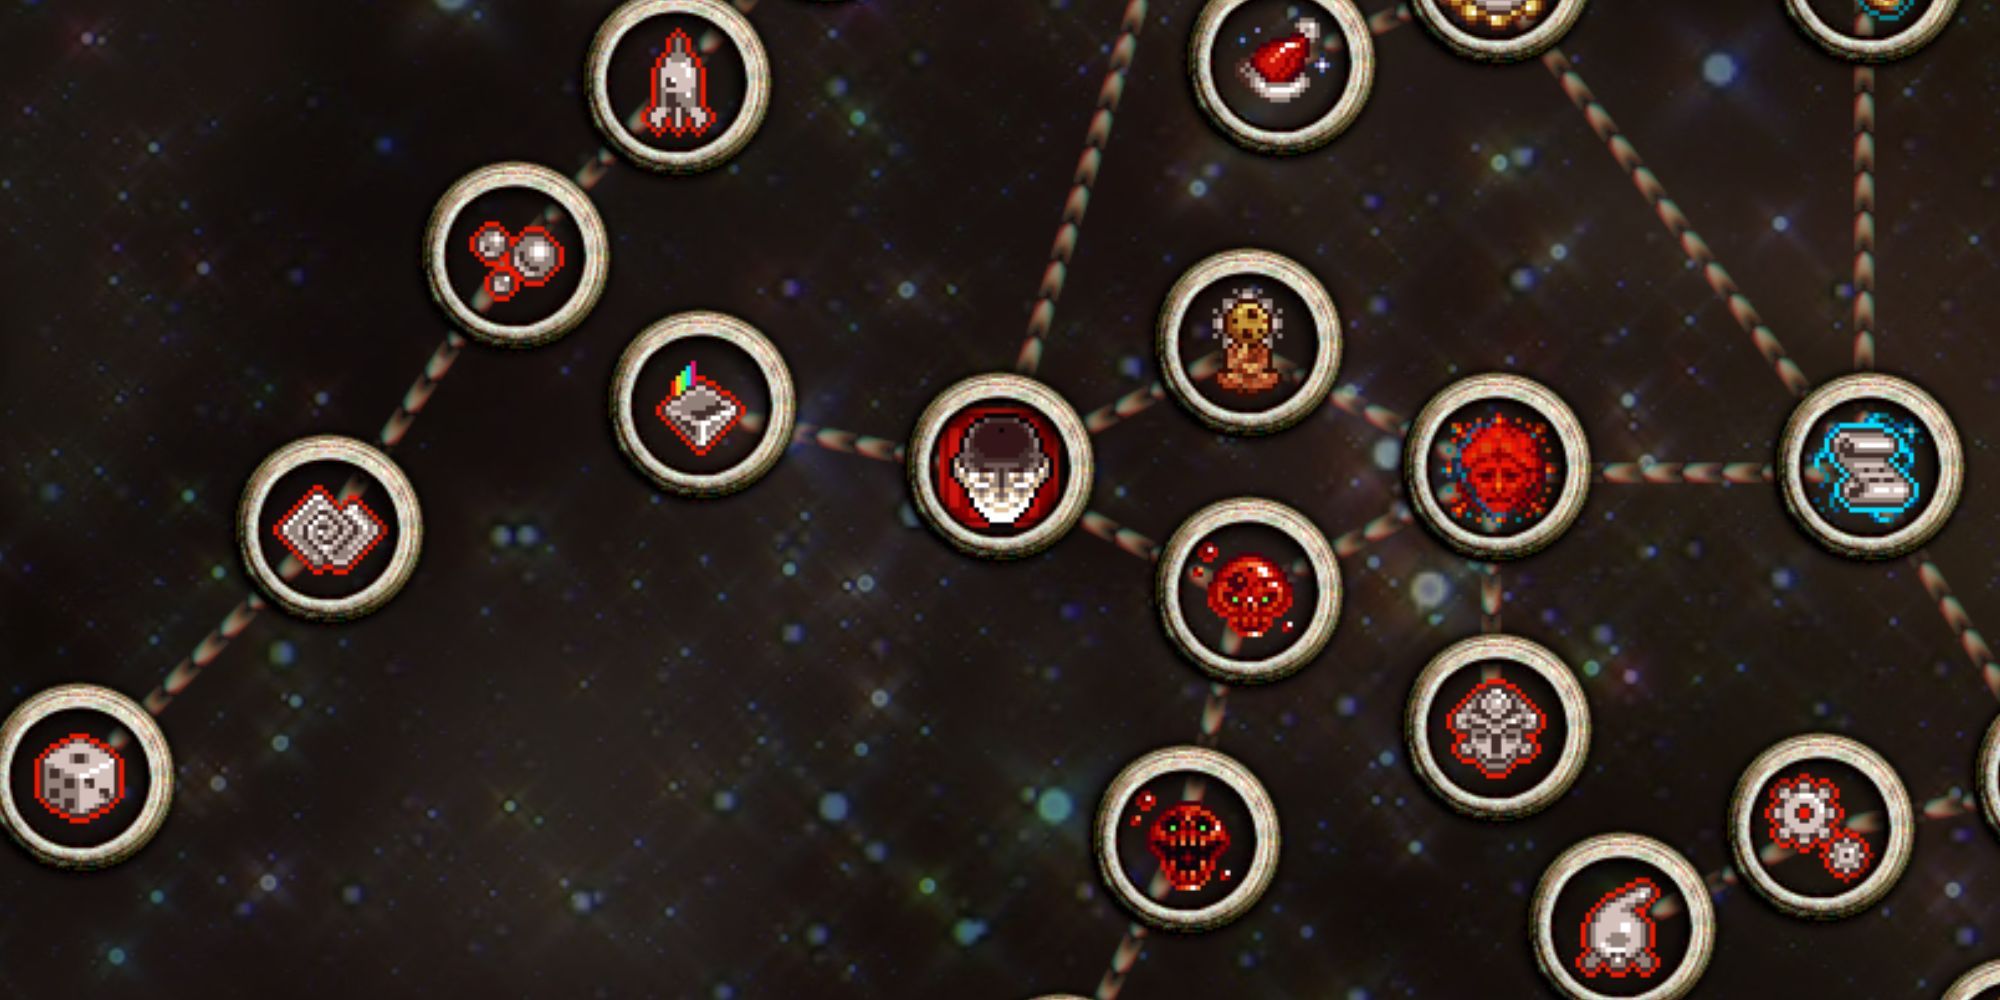 Cookie Clicker's heavenly upgrade screen displays a variety of circular icons.